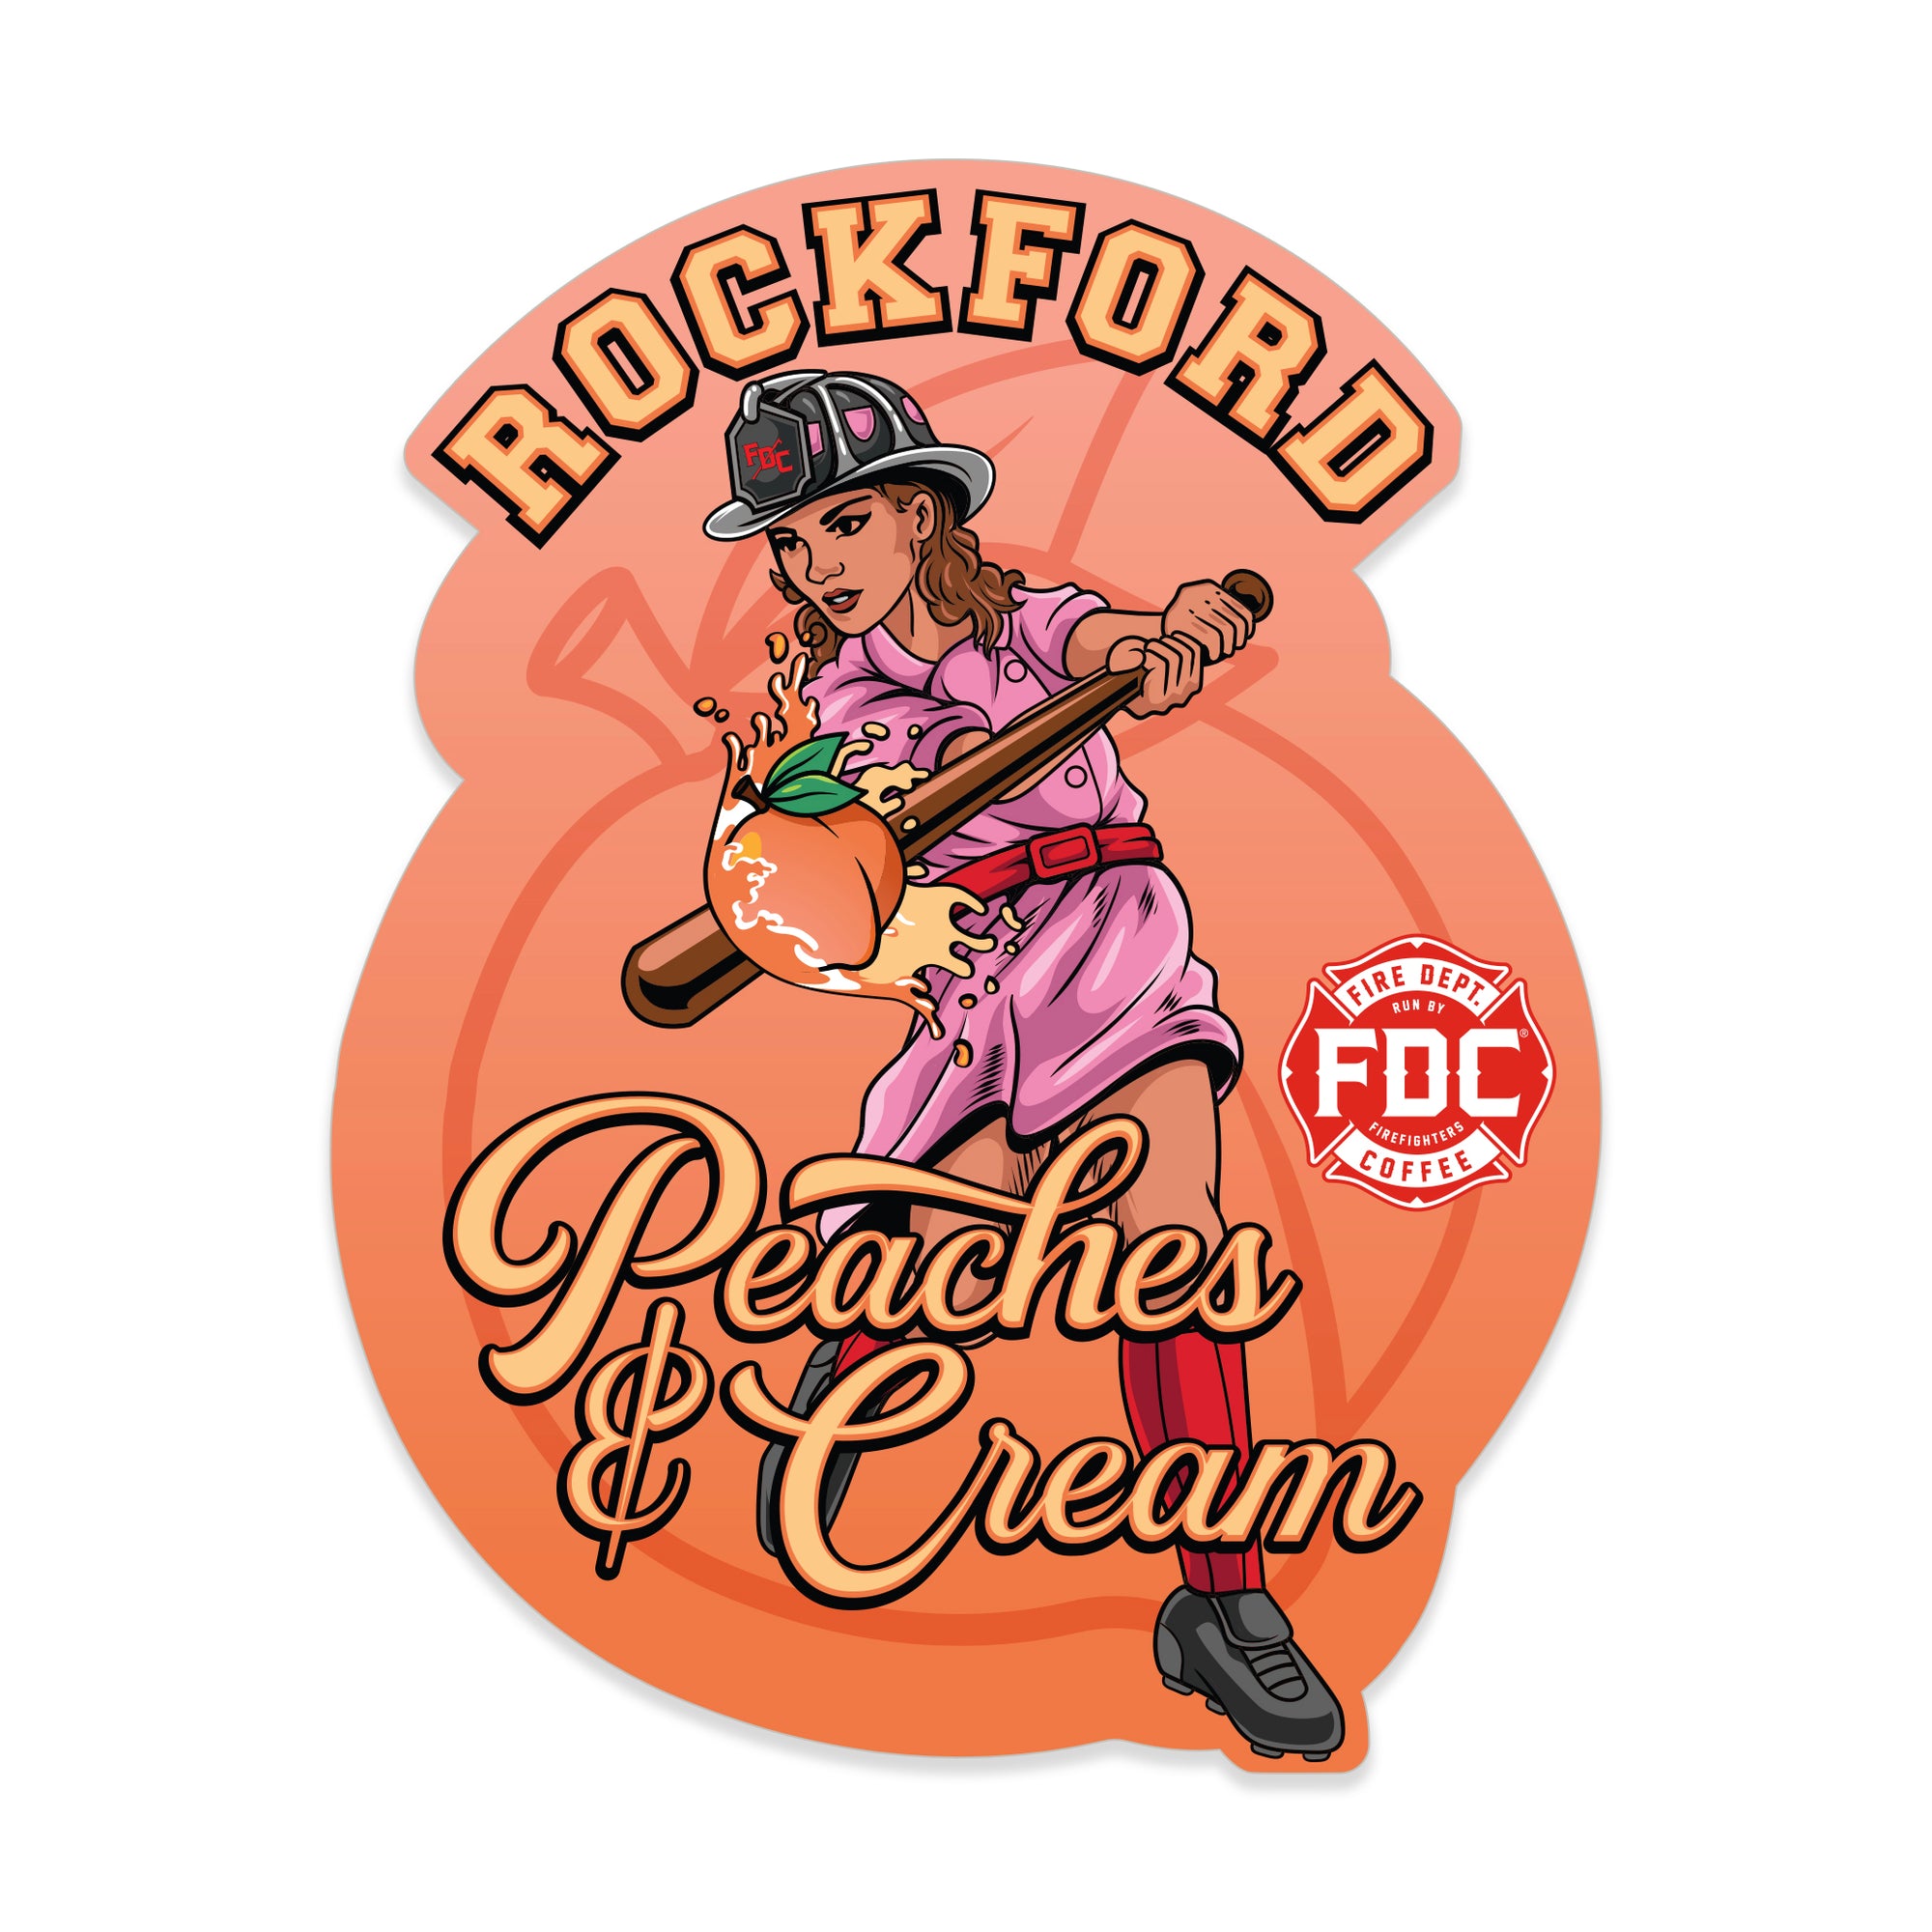 This sticker features an illustration of a female baseball player hitting a peach with a bat. Text around the edges reads "Rockford Peaches and Cream".